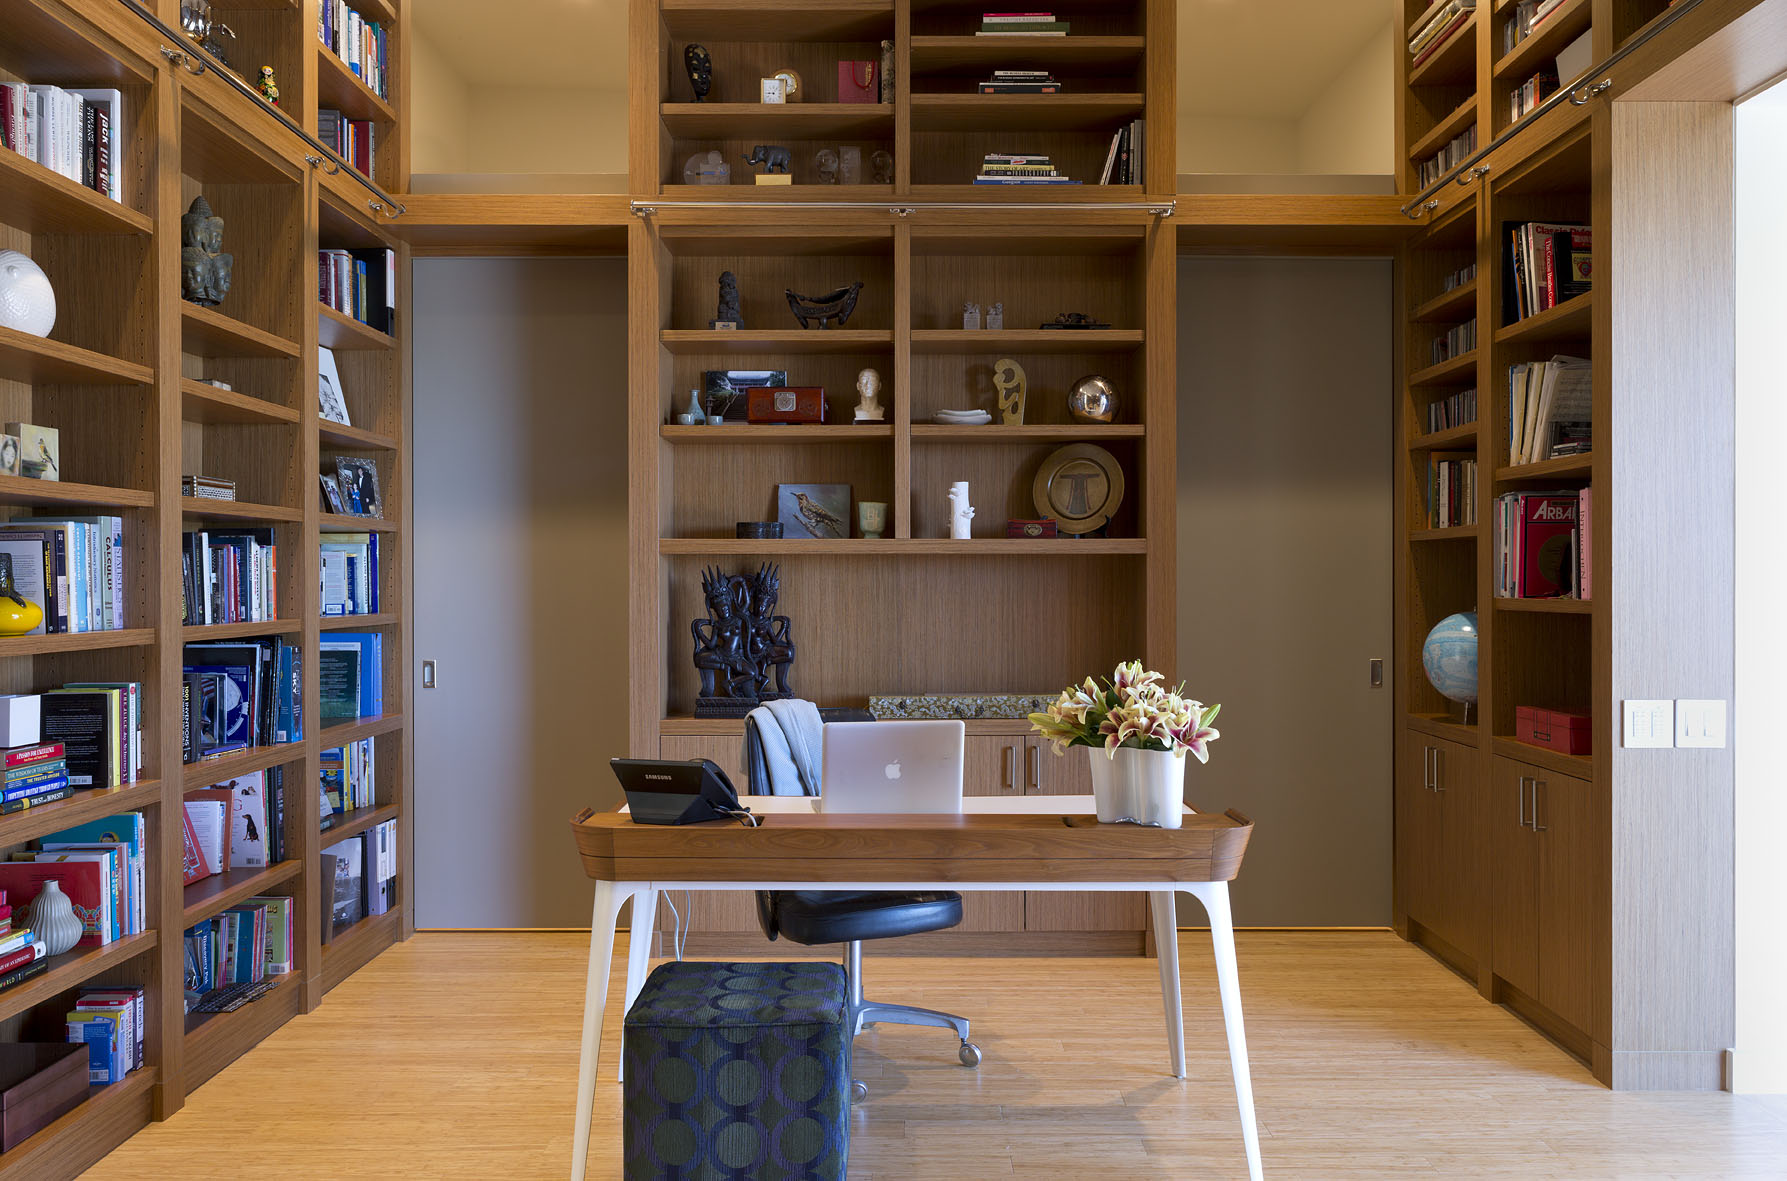 The owner's library also serves as a transition space into the master suite.